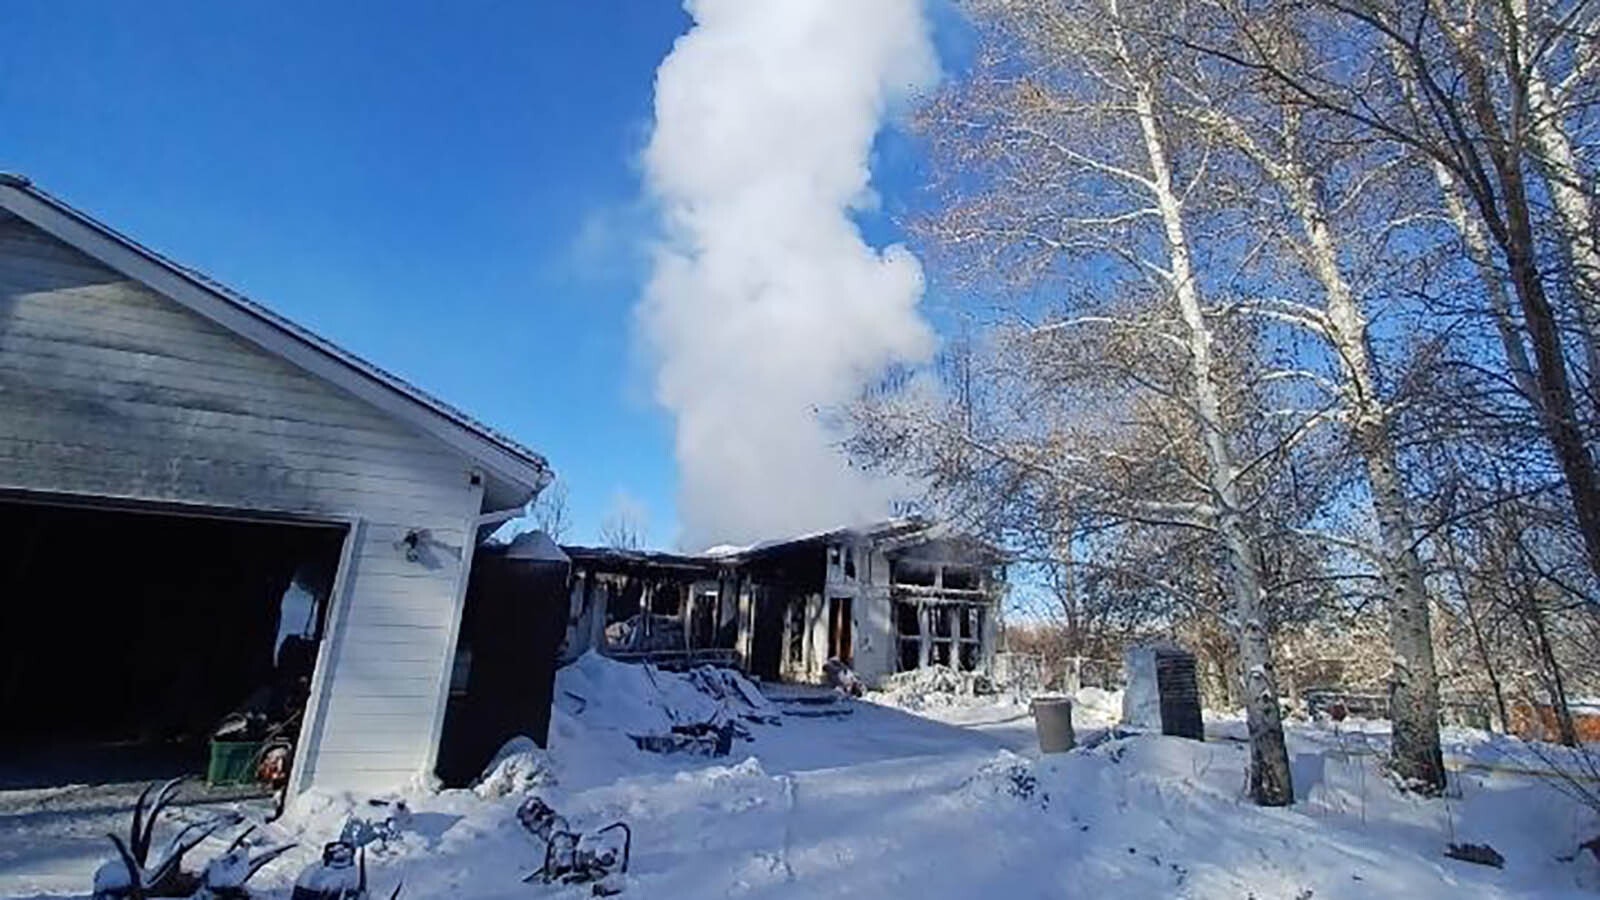 The house was still smoking the day after the accidental, but unsolvable fire that destroyed it Jan. 12.